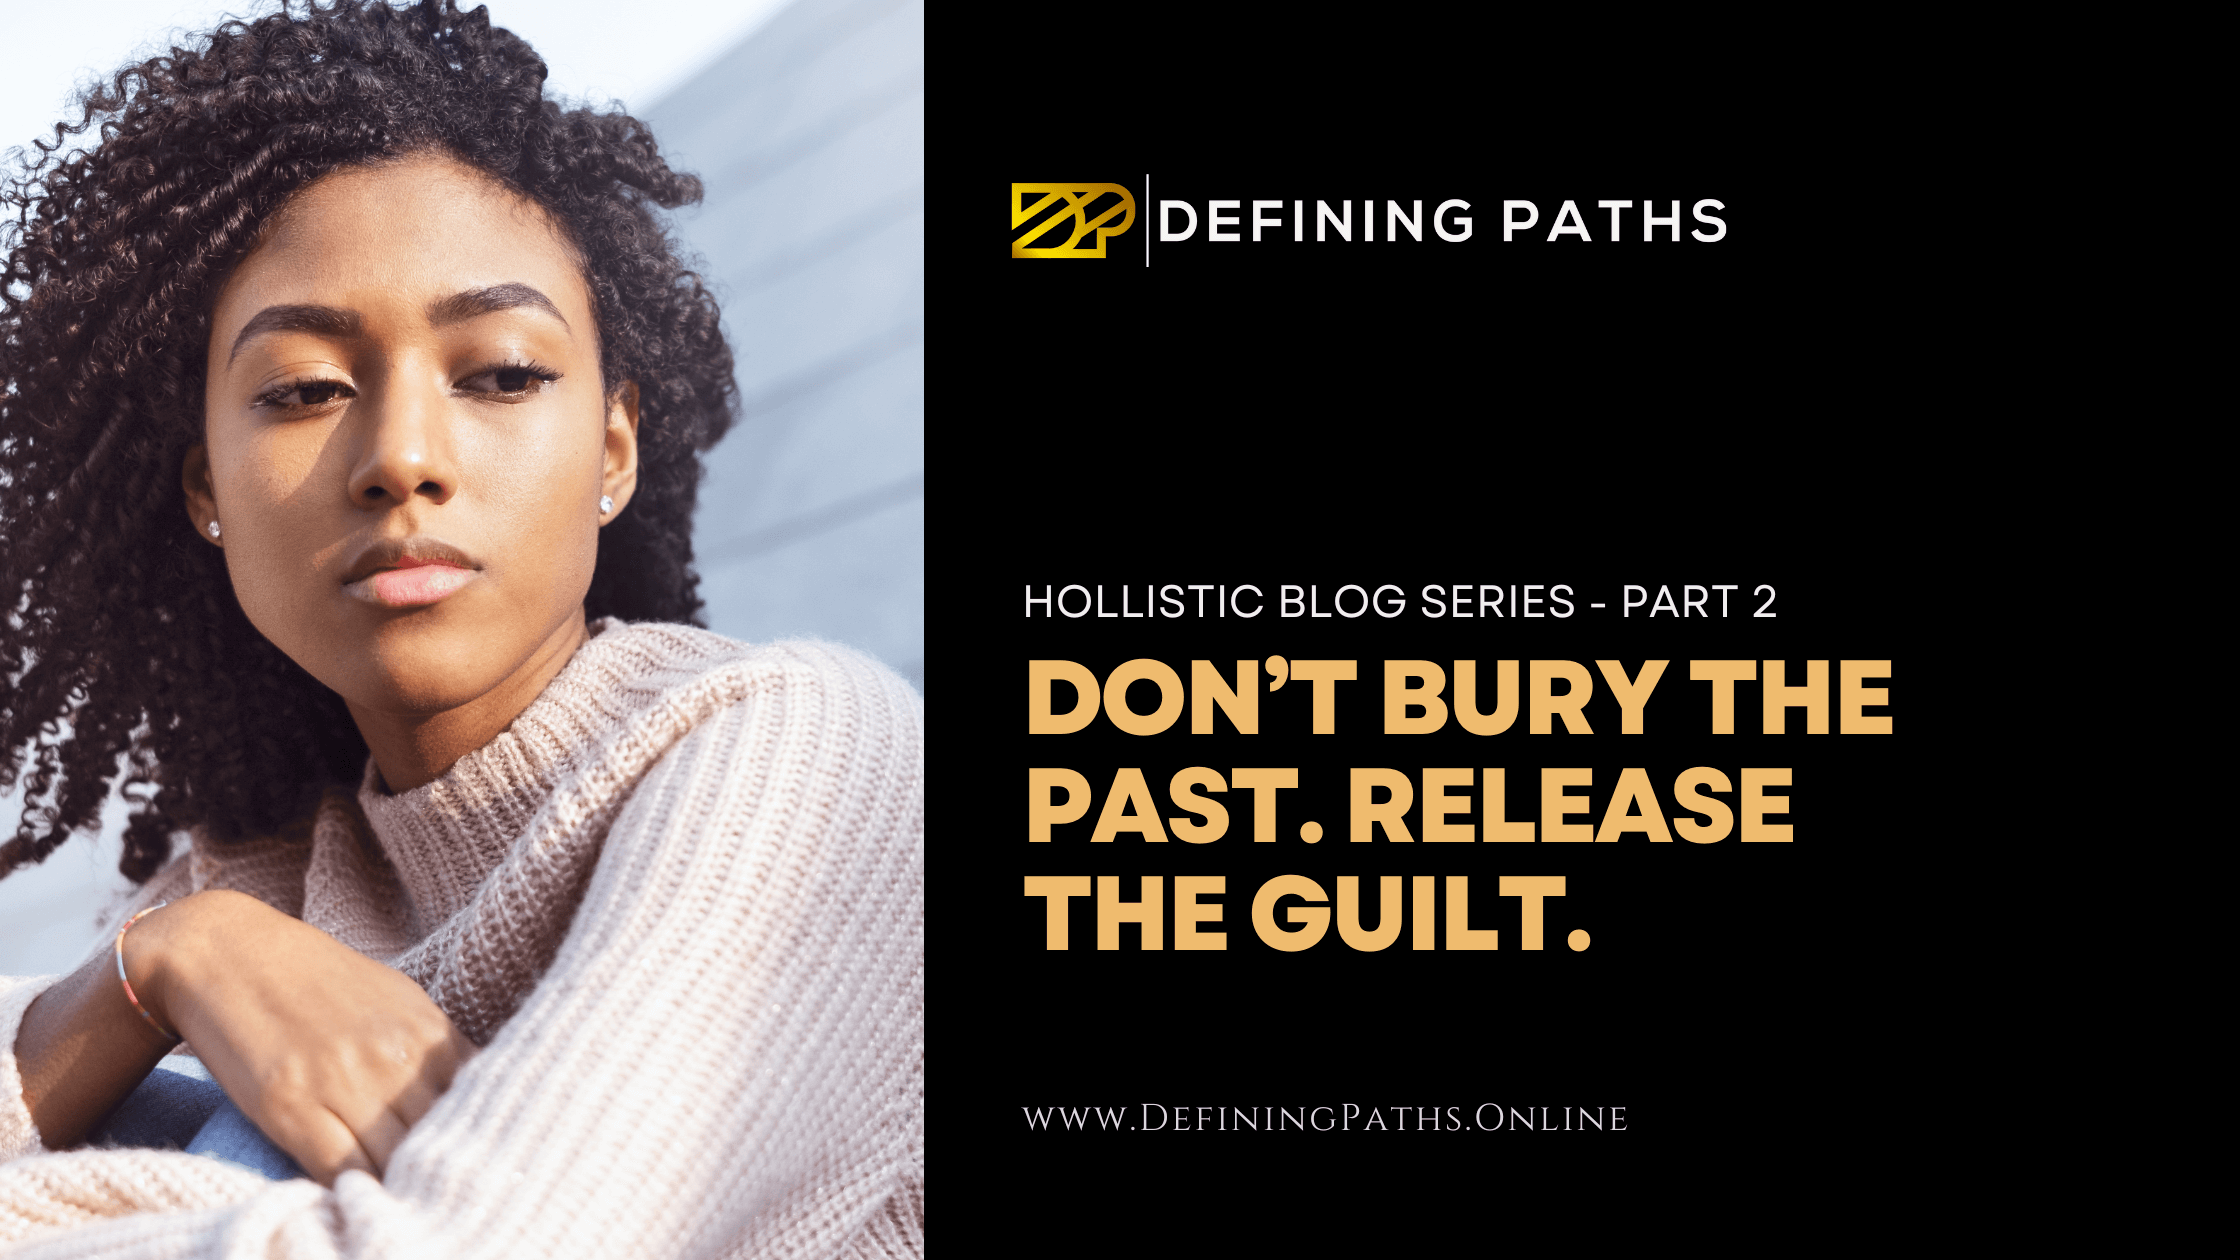 Featured image for “Don’t Bury the Past. Release the Guilt.”